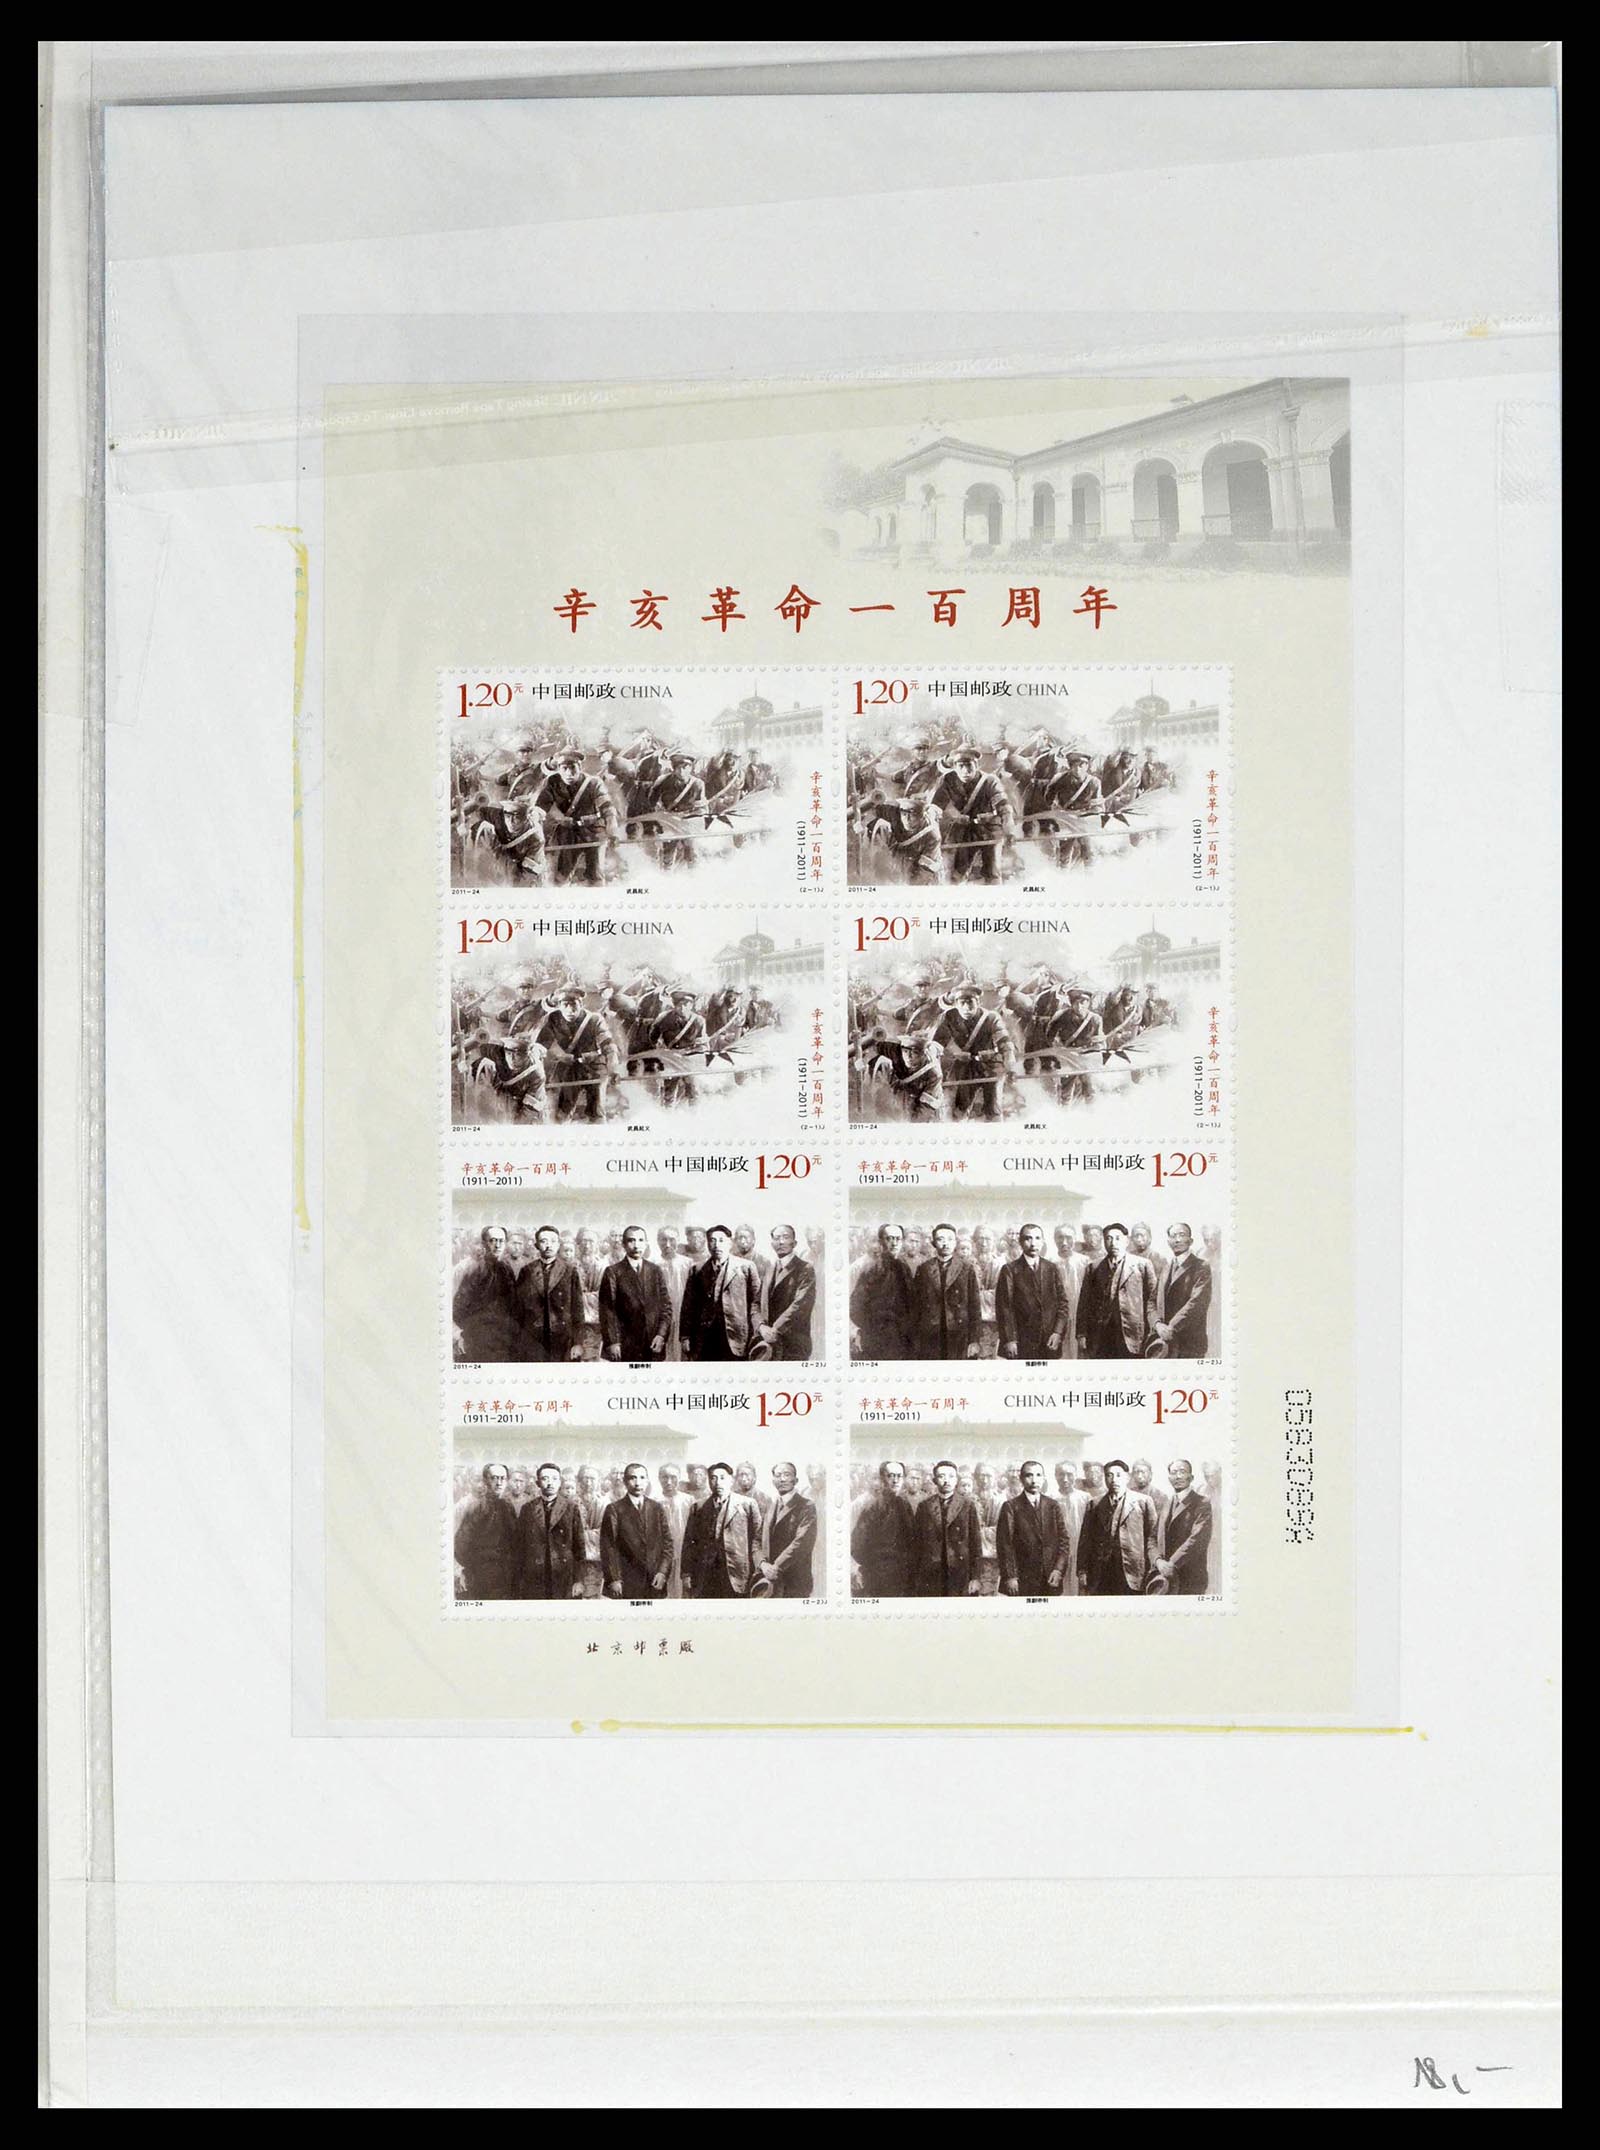 38536 0047 - Stamp collection 38536 China 2011.